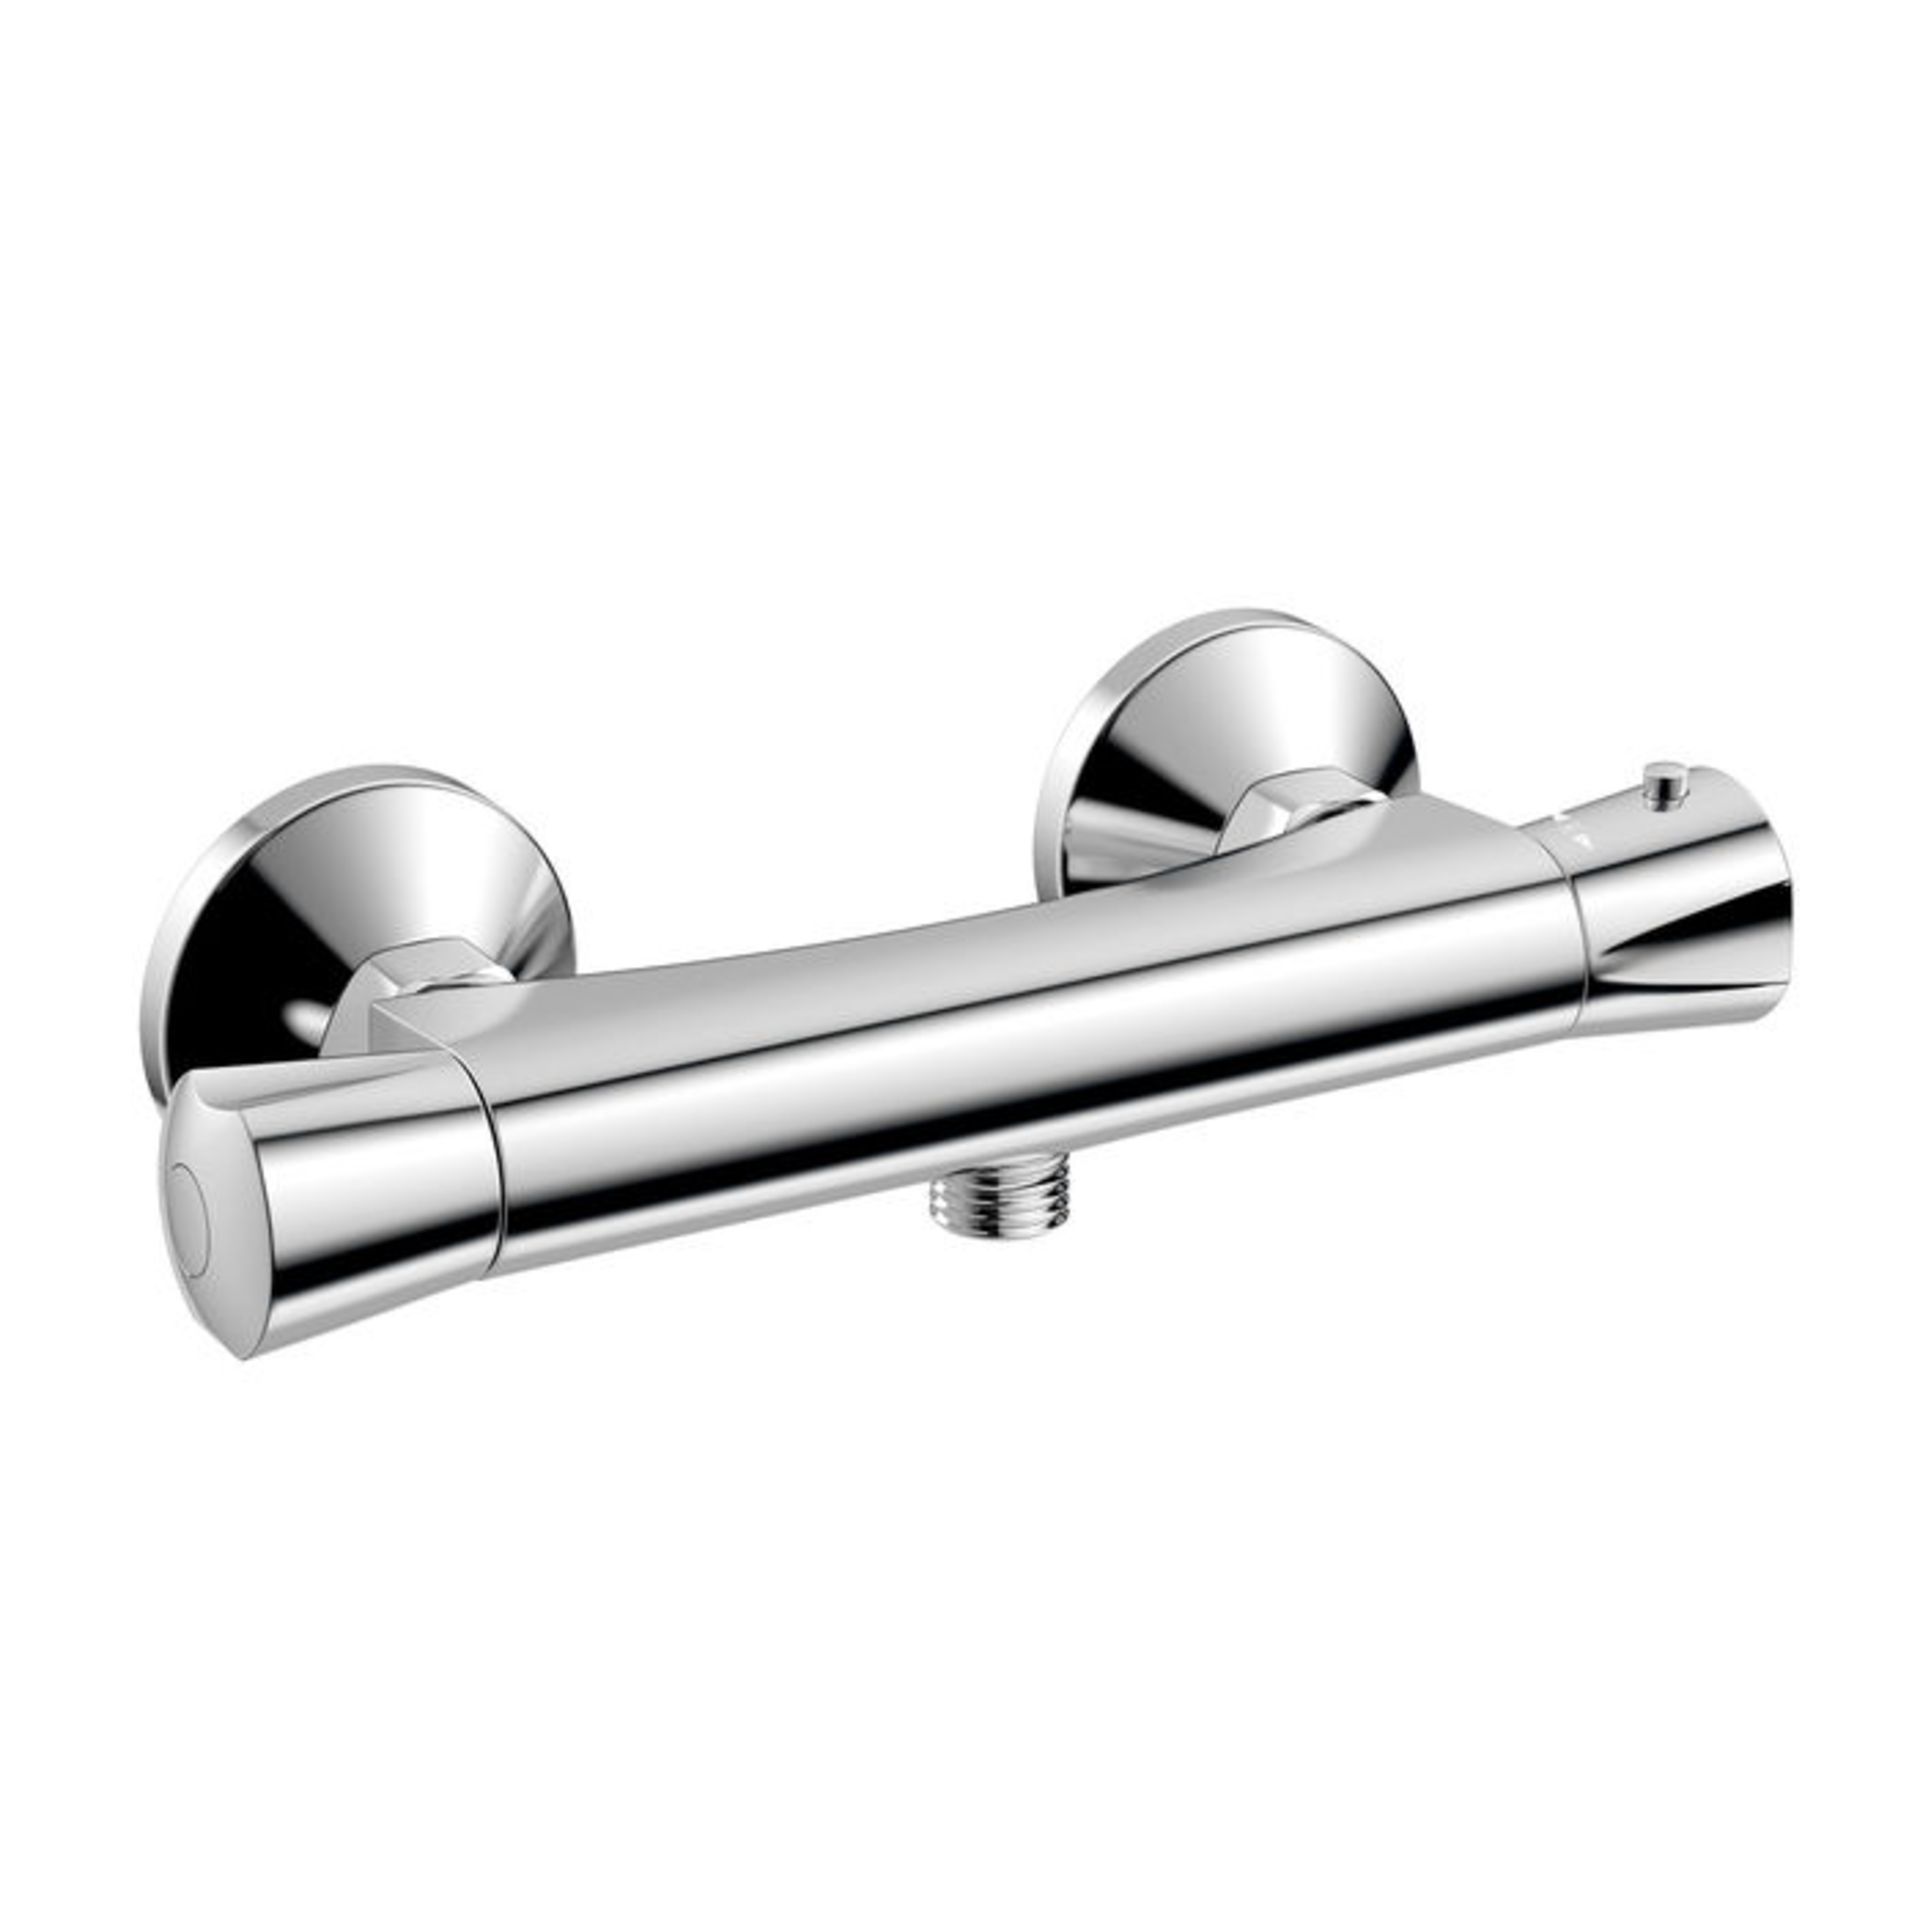 (D1059) Thermostatic Shower Valve - Round Bar Mixer Chrome plated solid brass mixer Cool to T... - Image 2 of 2